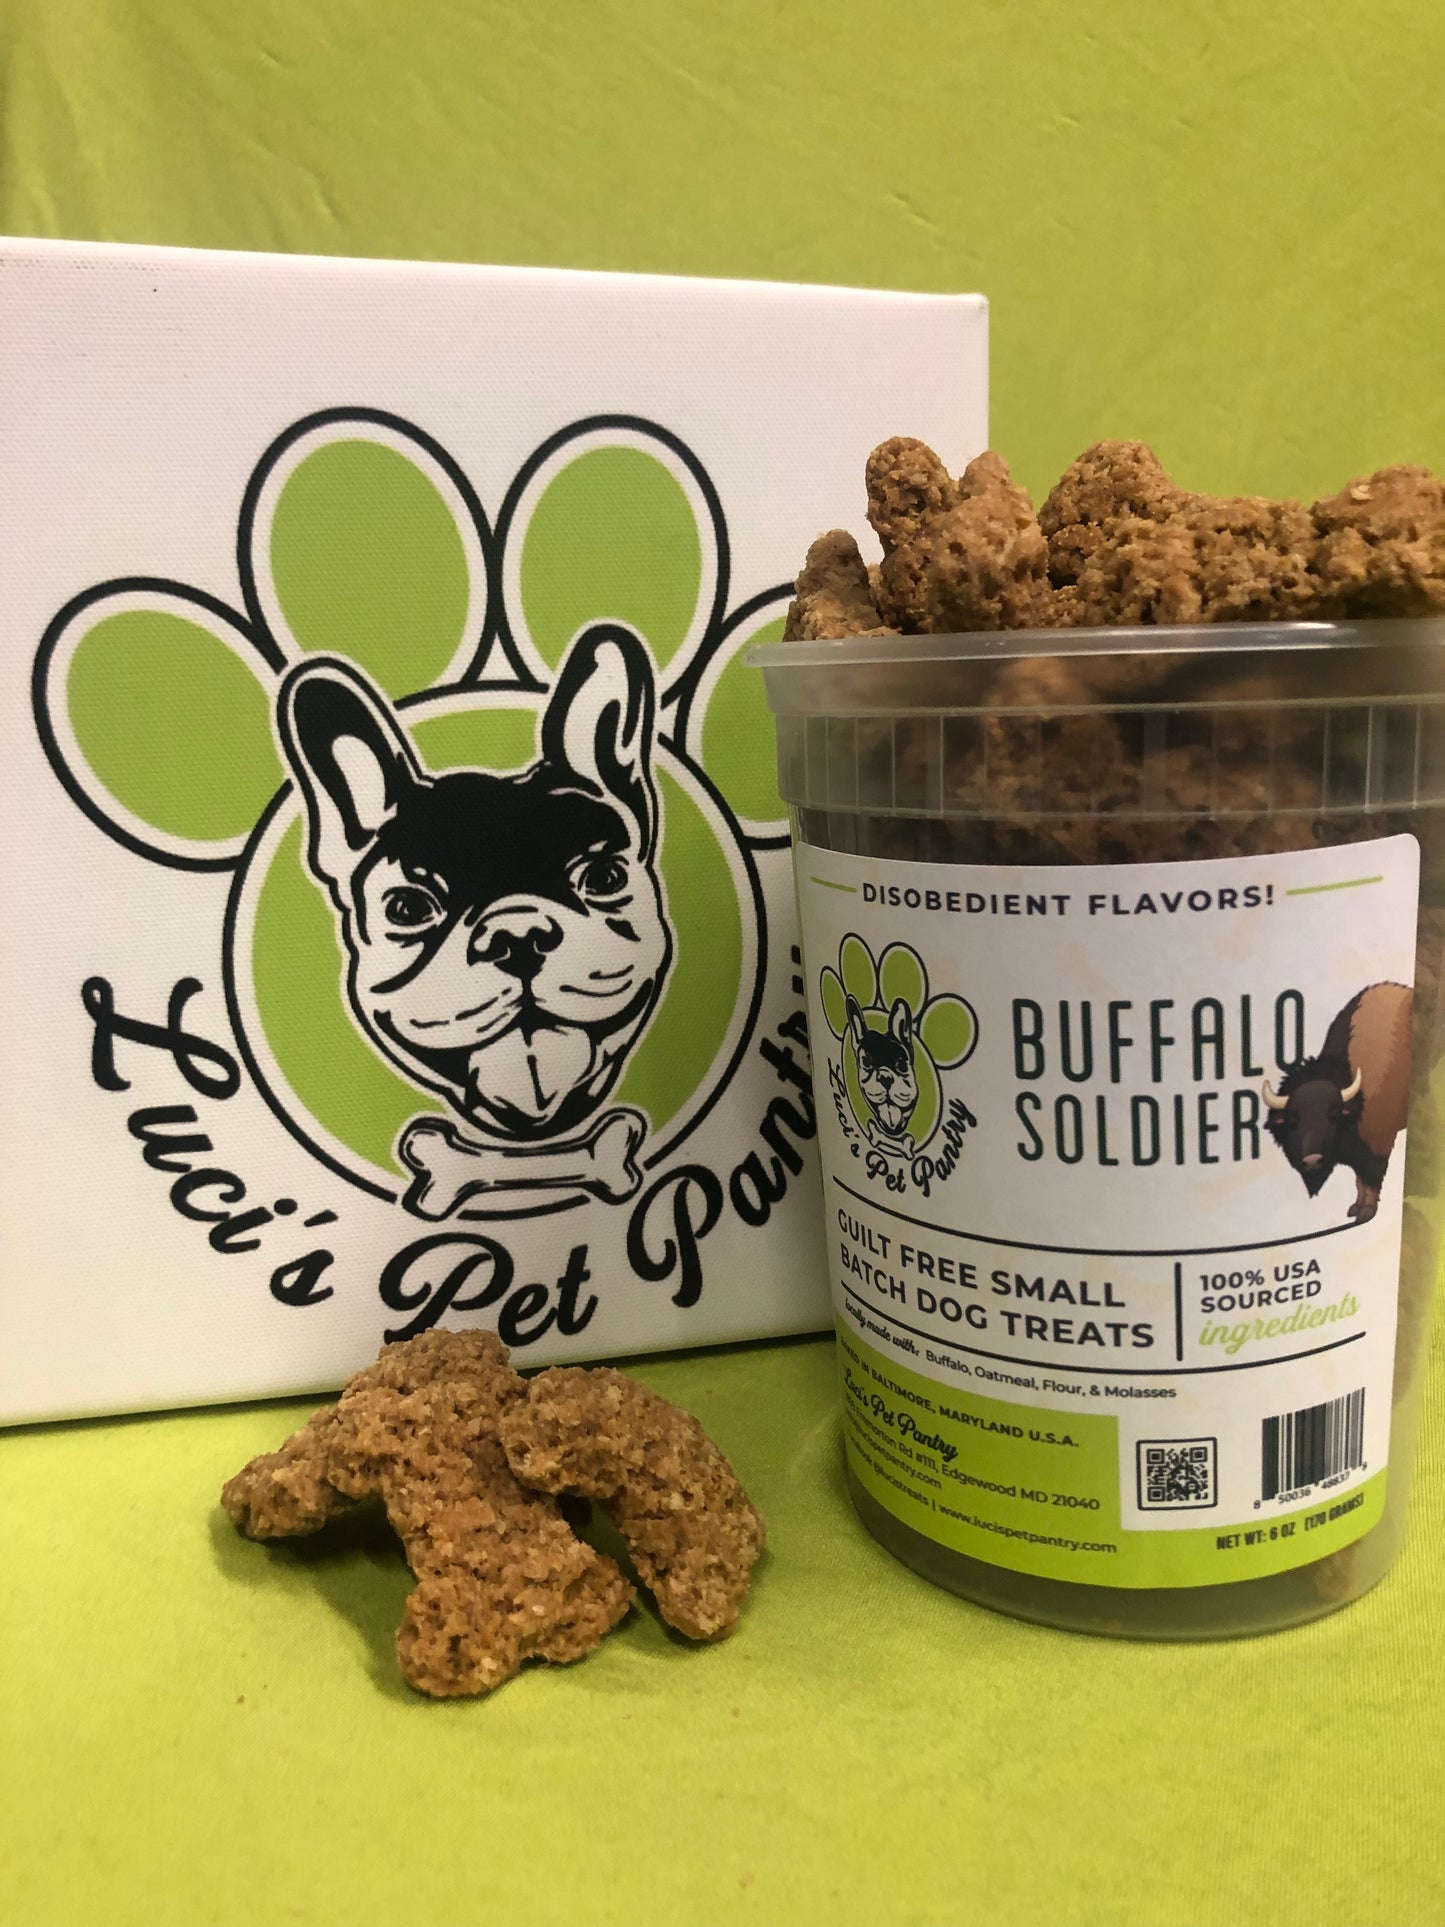 Buffalo Soldier - All Natural "Bison" Dog & Puppy Treats - Disobedient Tub of Biscuits